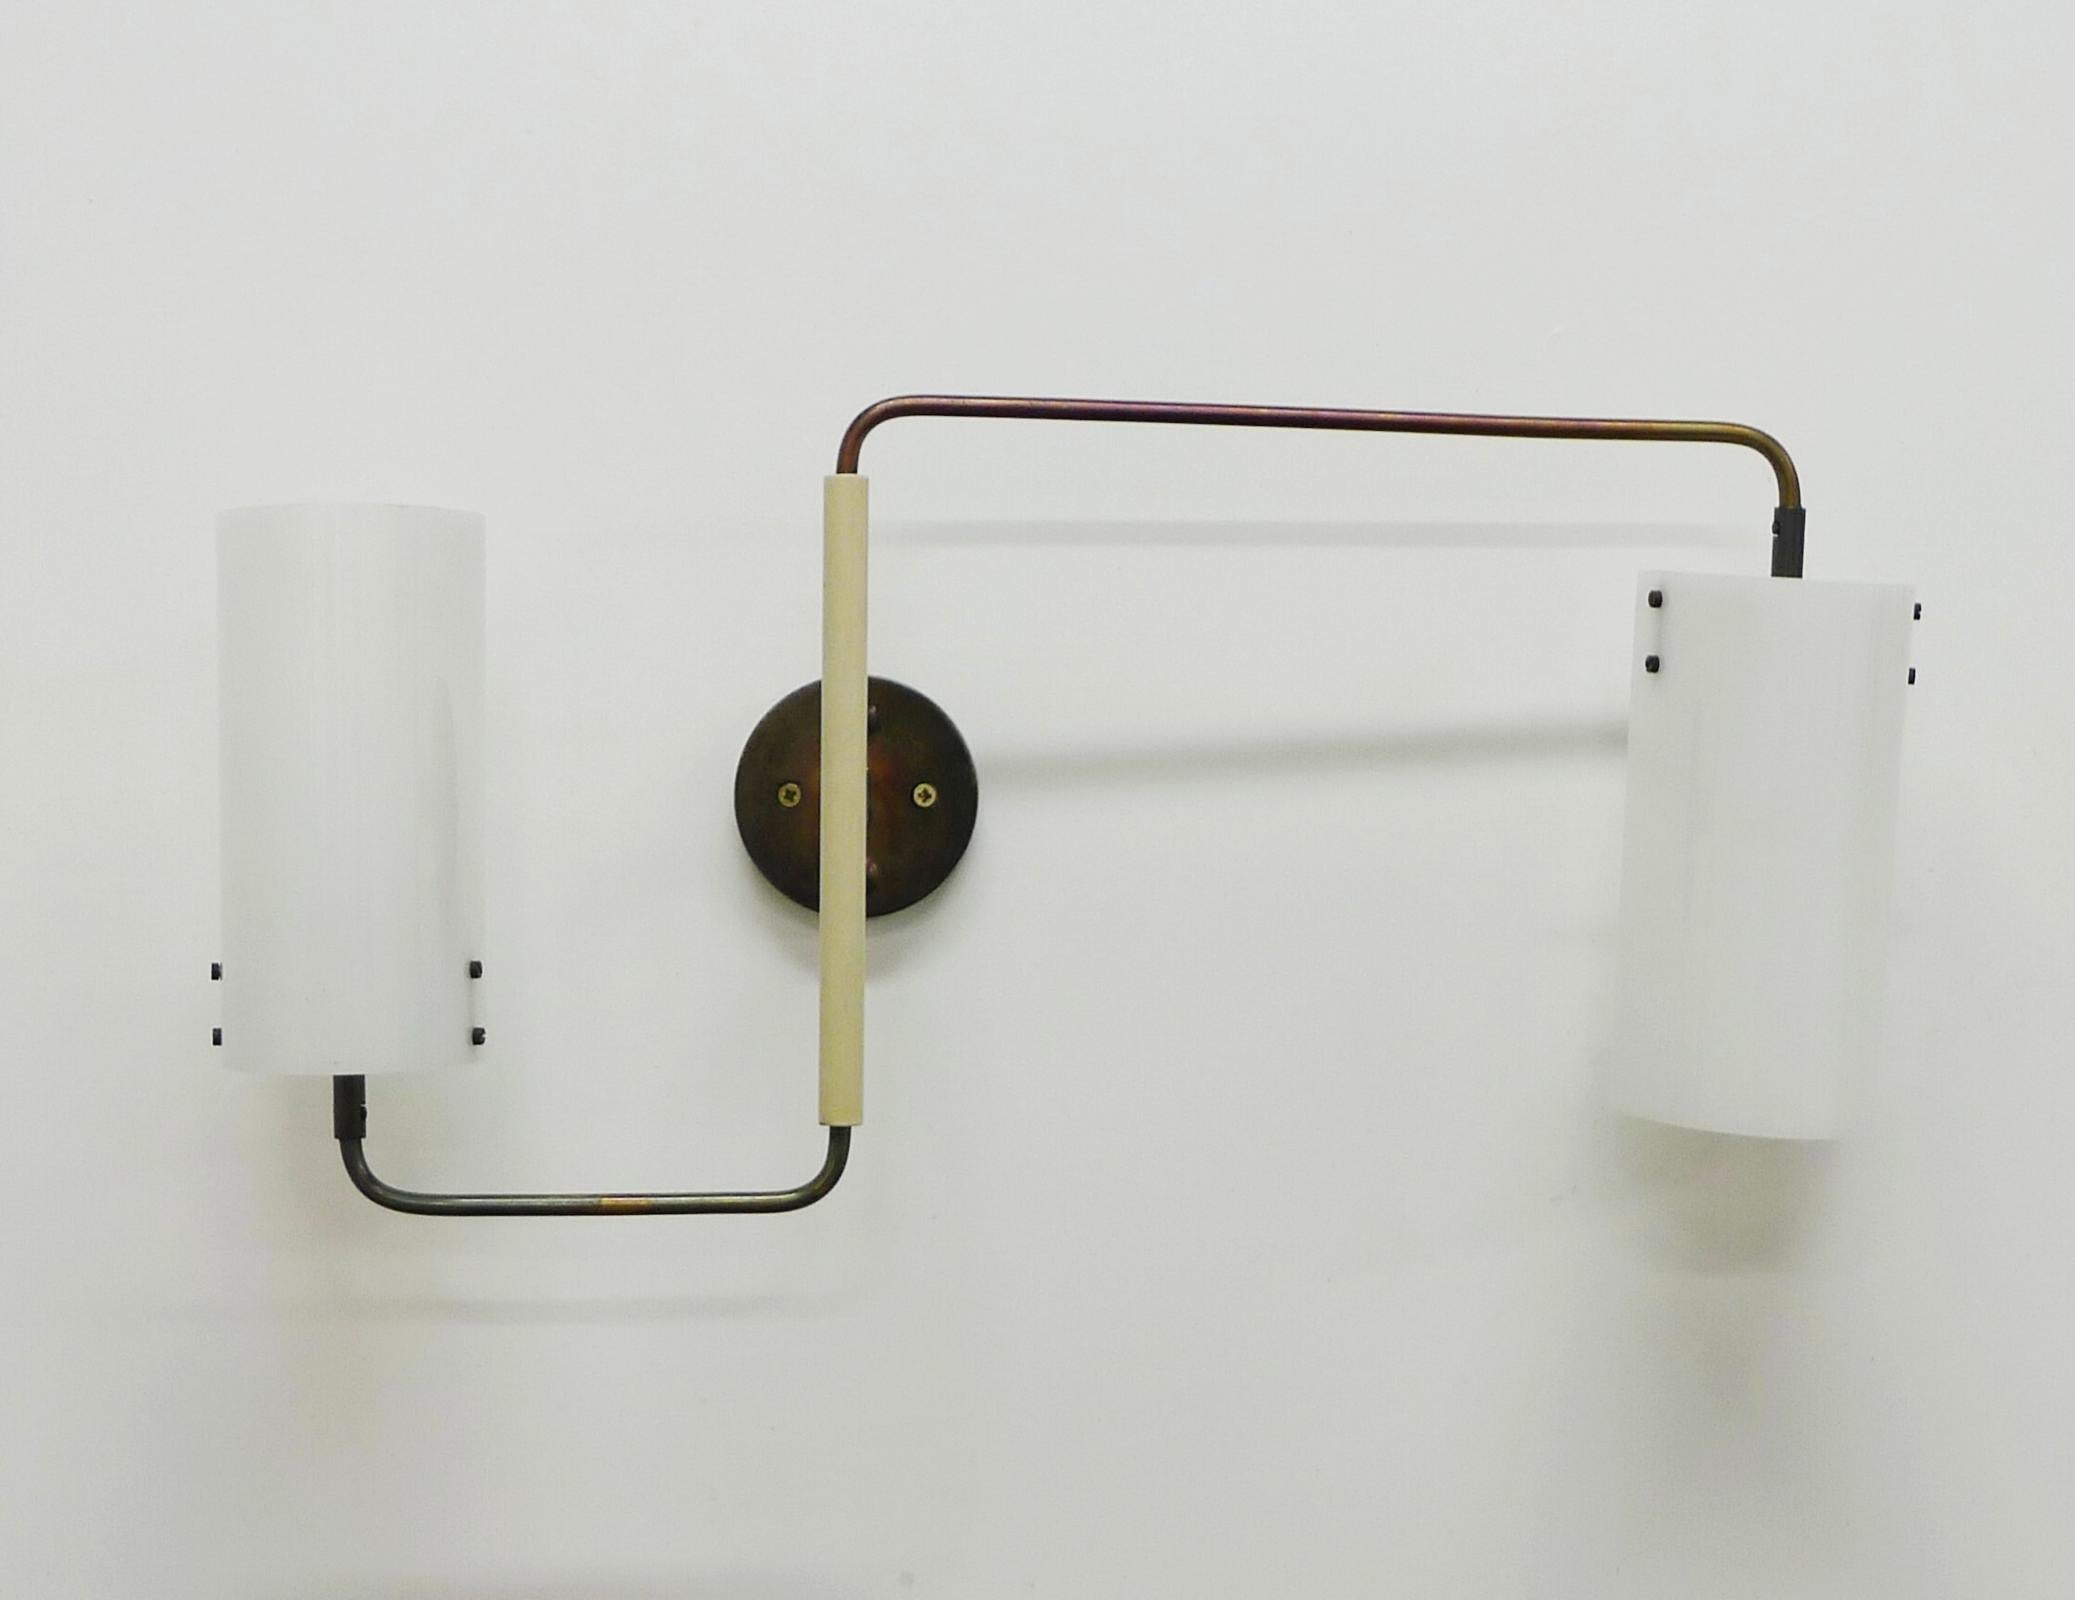 Pair of Oluce Twin-Shade Adjustable Wall Lights, Designed by Tito Agnoli, 1955 For Sale 2